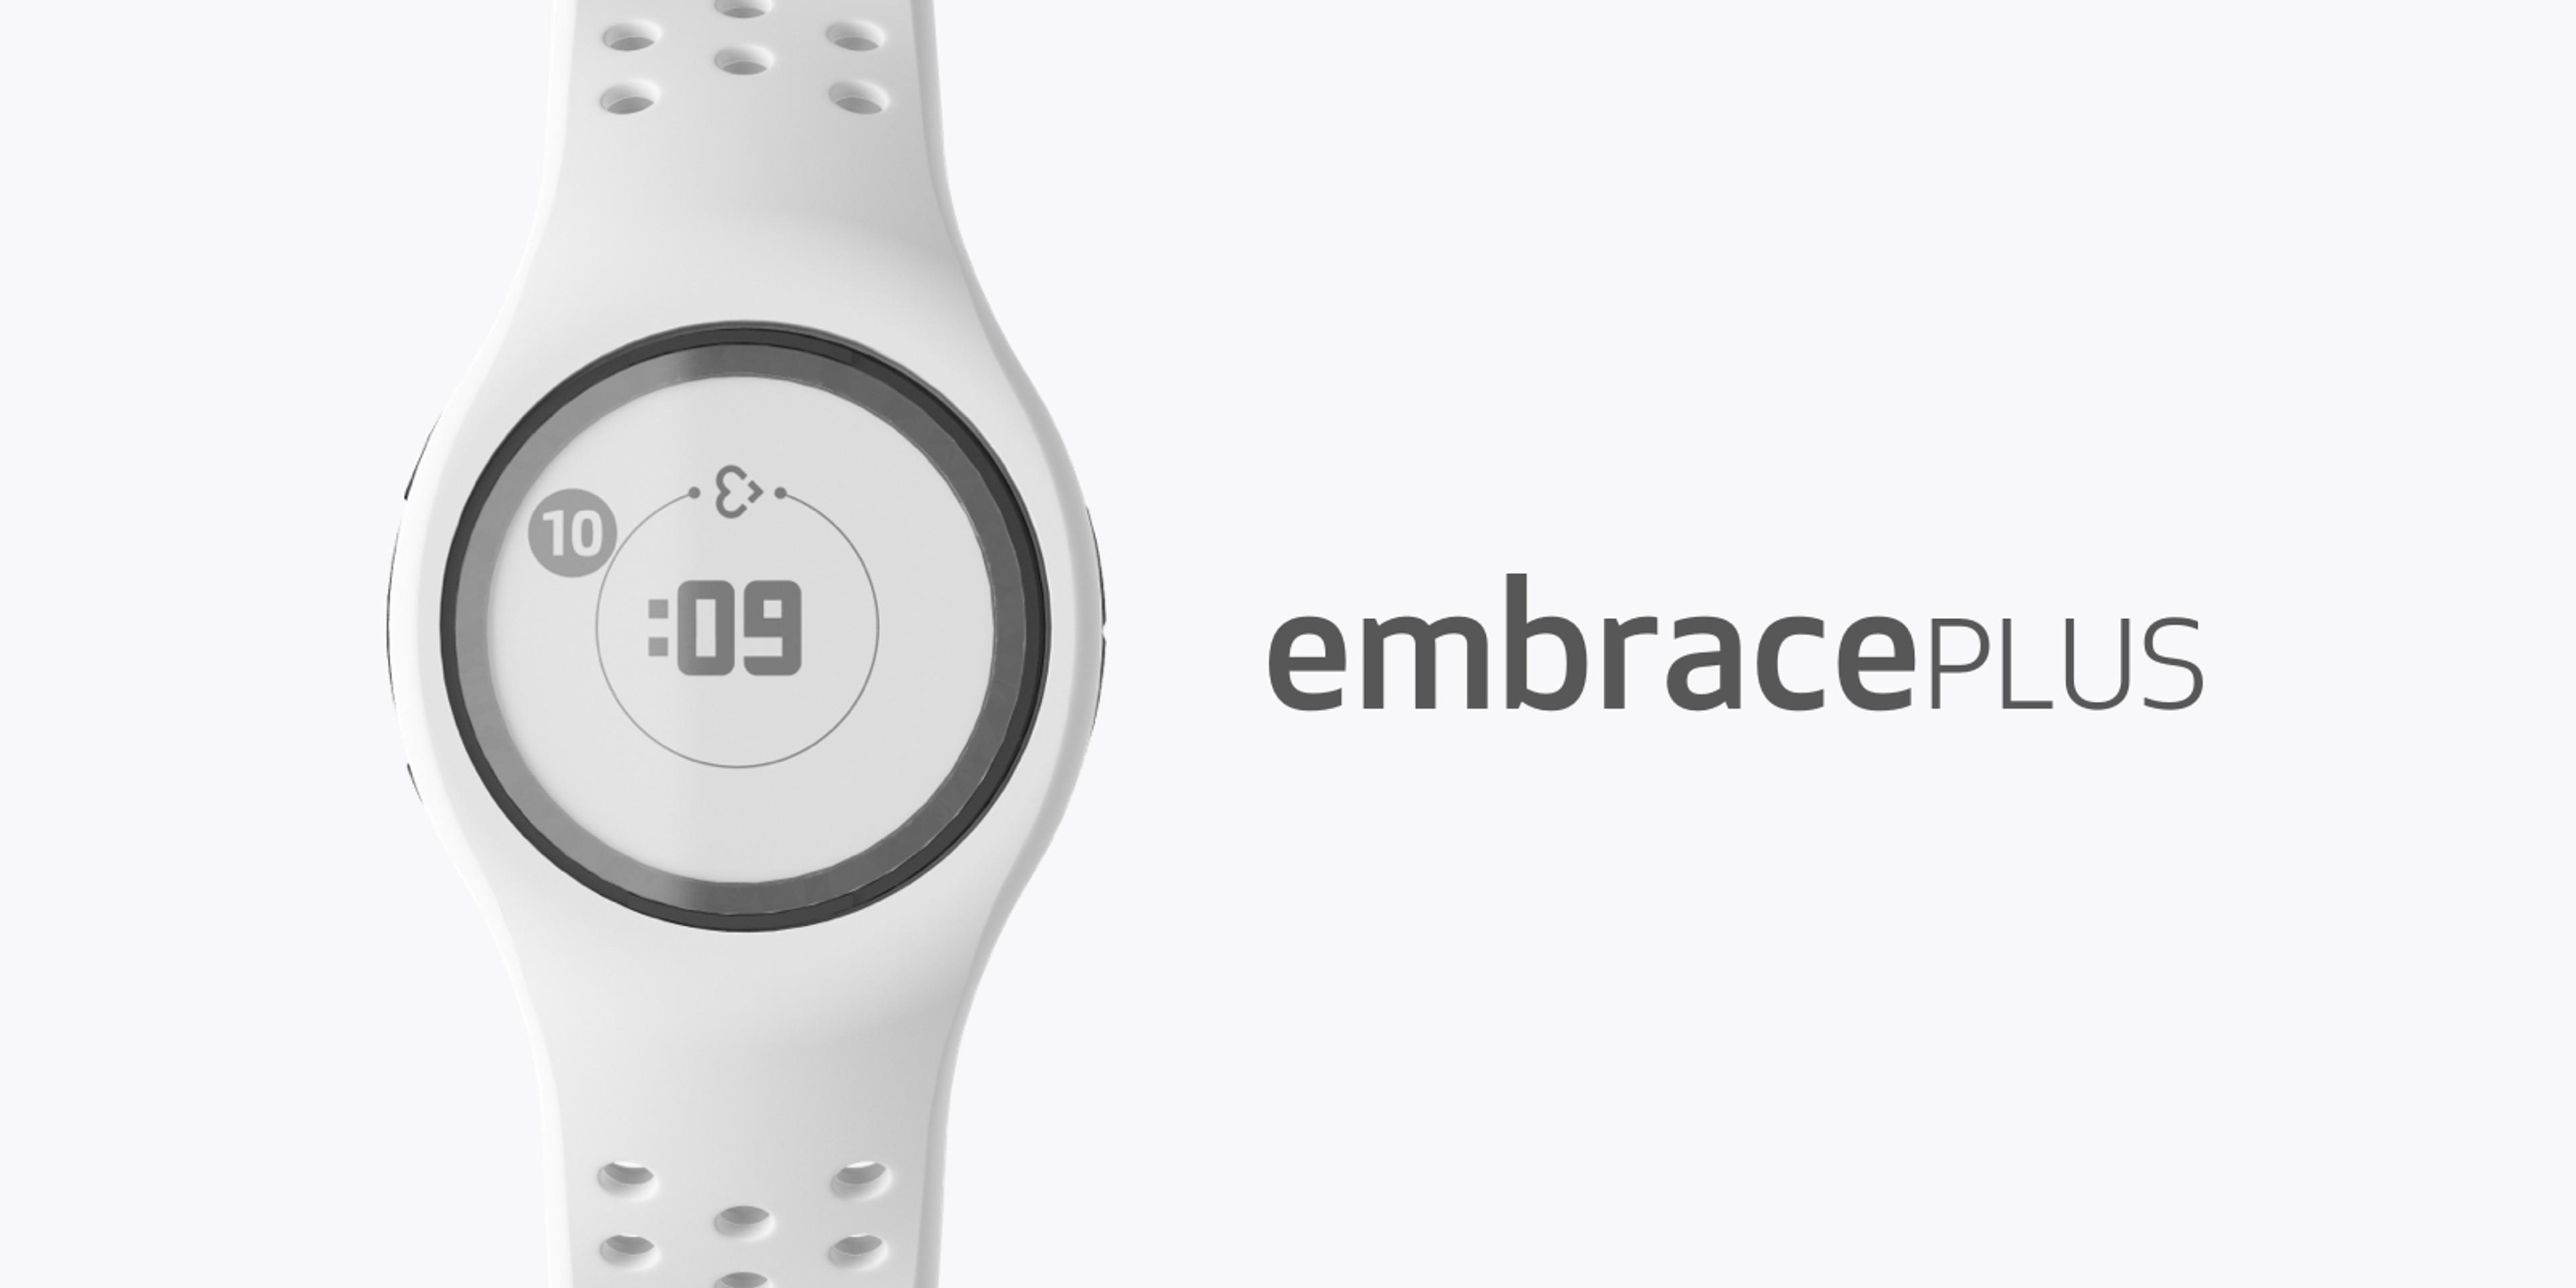 Lessons For The Future From The World's First Smartwatch